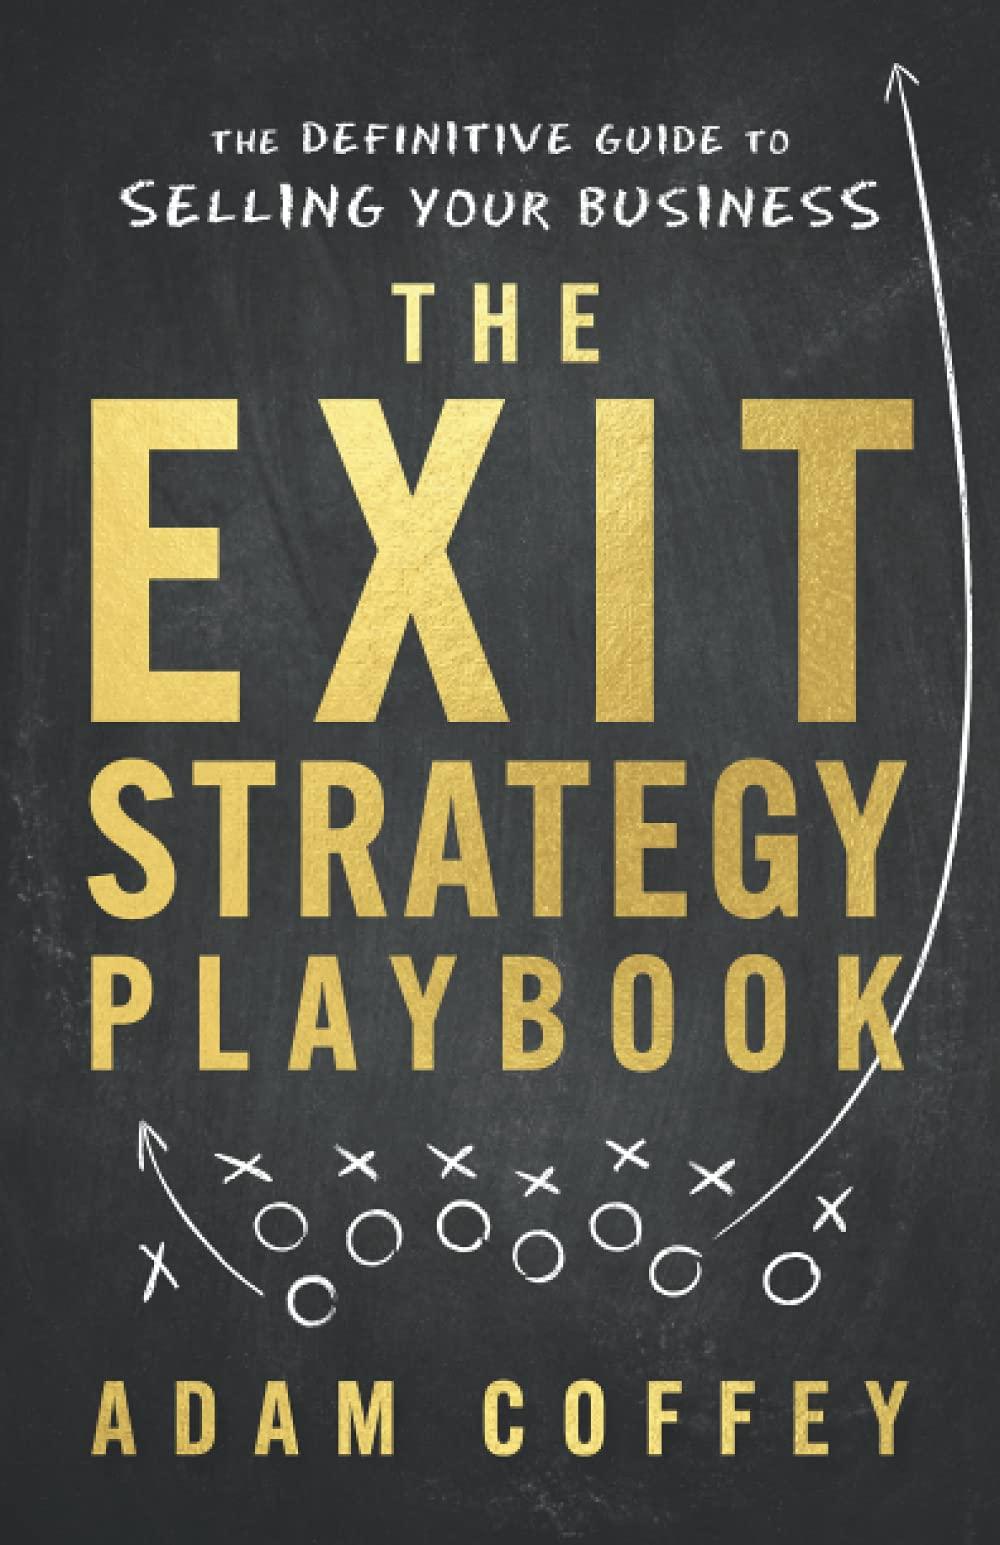 the exit-strategy playbook the definitive guide to selling your business 1st edition adam coffey 1544523033,